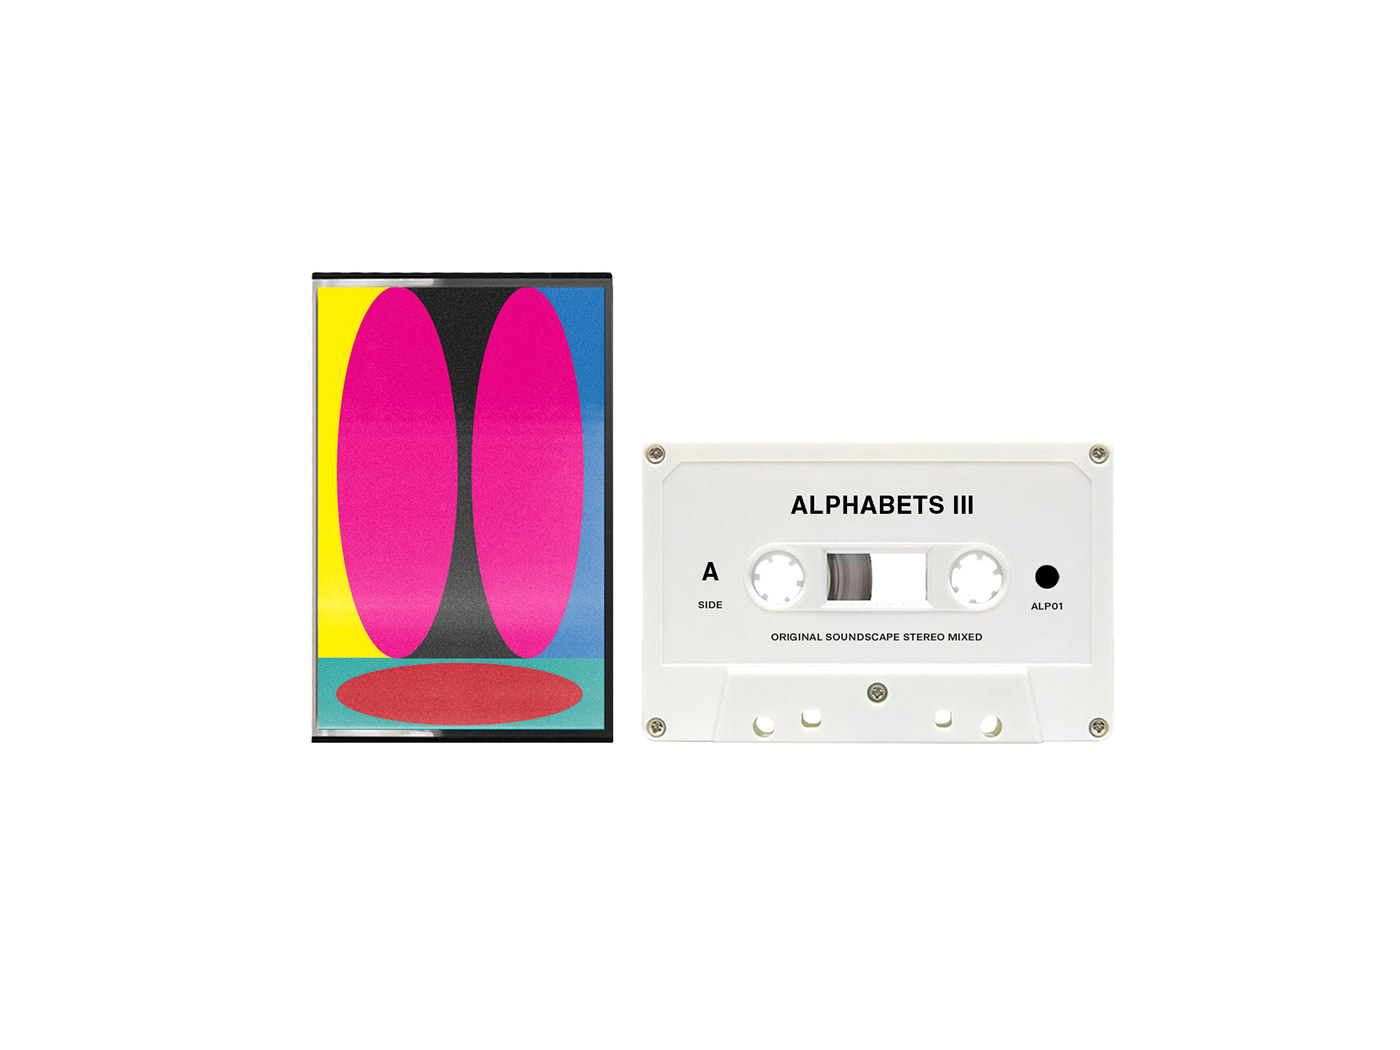 cassette abstract cover tape geometric color minimal electronic graphic vector